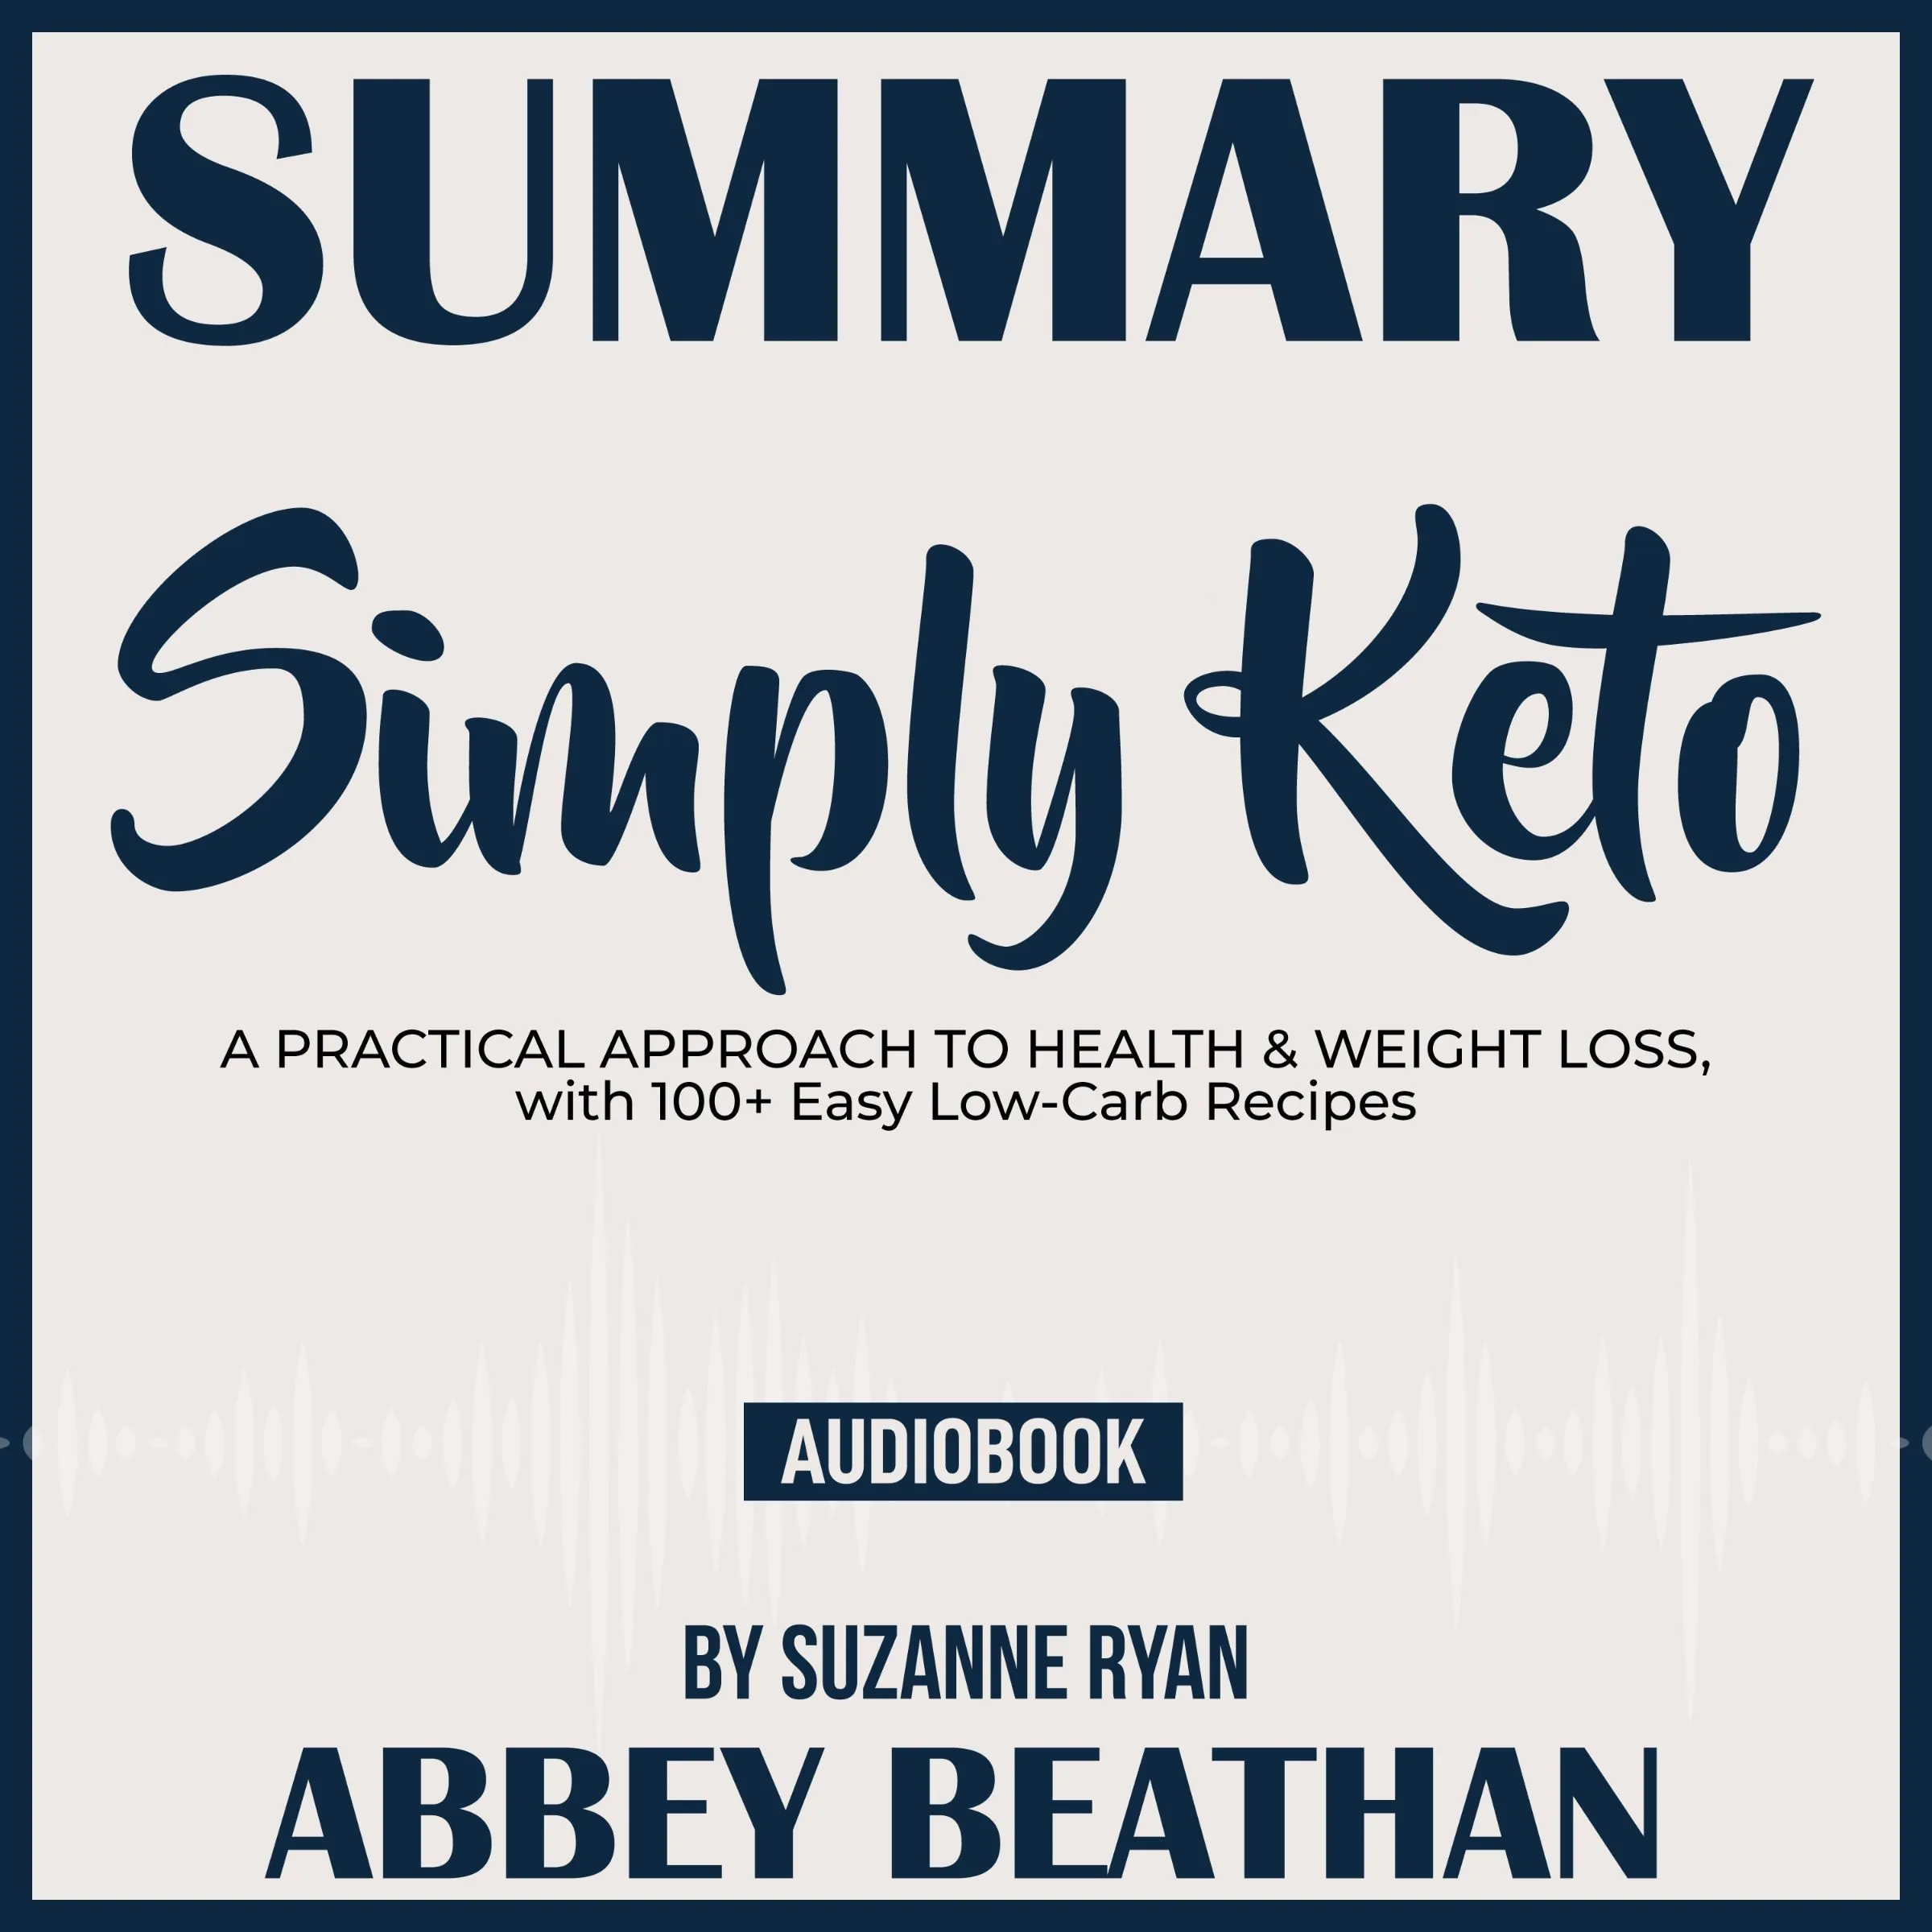 Summary of Simply Keto: A Practical Approach to Health & Weight Loss, with 100+ Easy Low-Carb Recipes by Suzanne Ryan Audiobook by Abbey Beathan